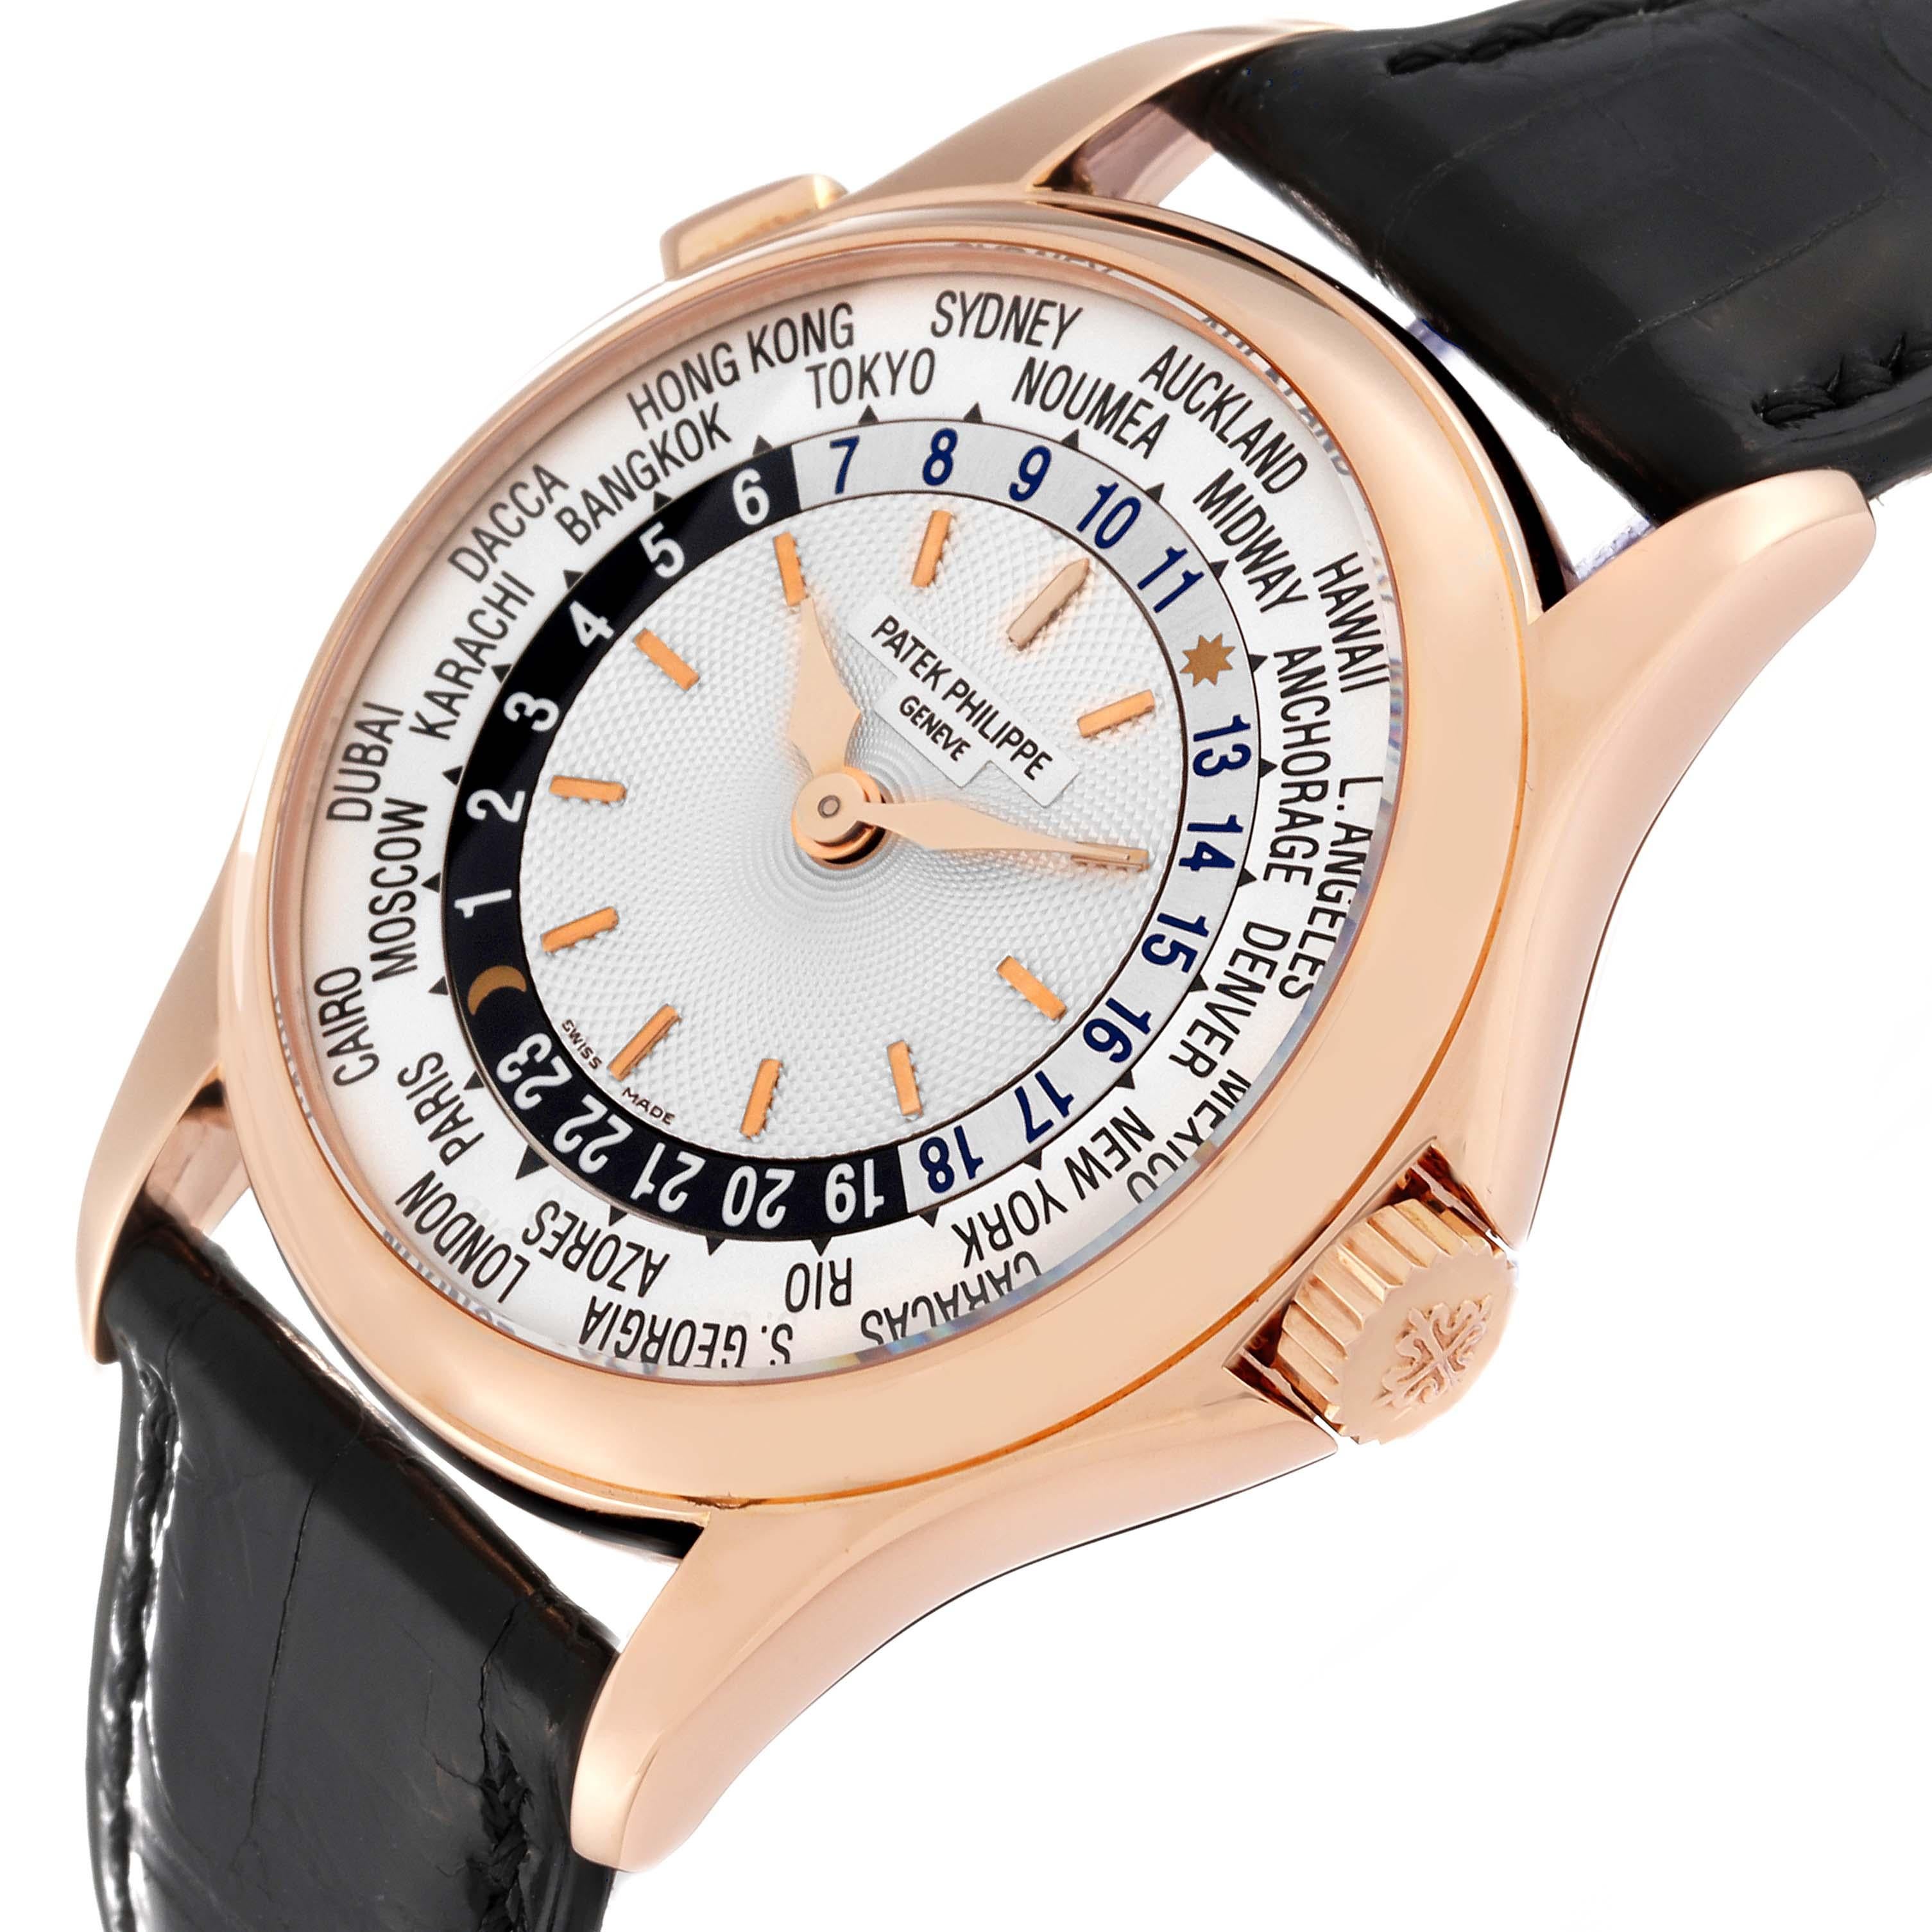 Men's Patek Philippe World Time Automatic Silver Dial Rose Gold Mens Watch 5110